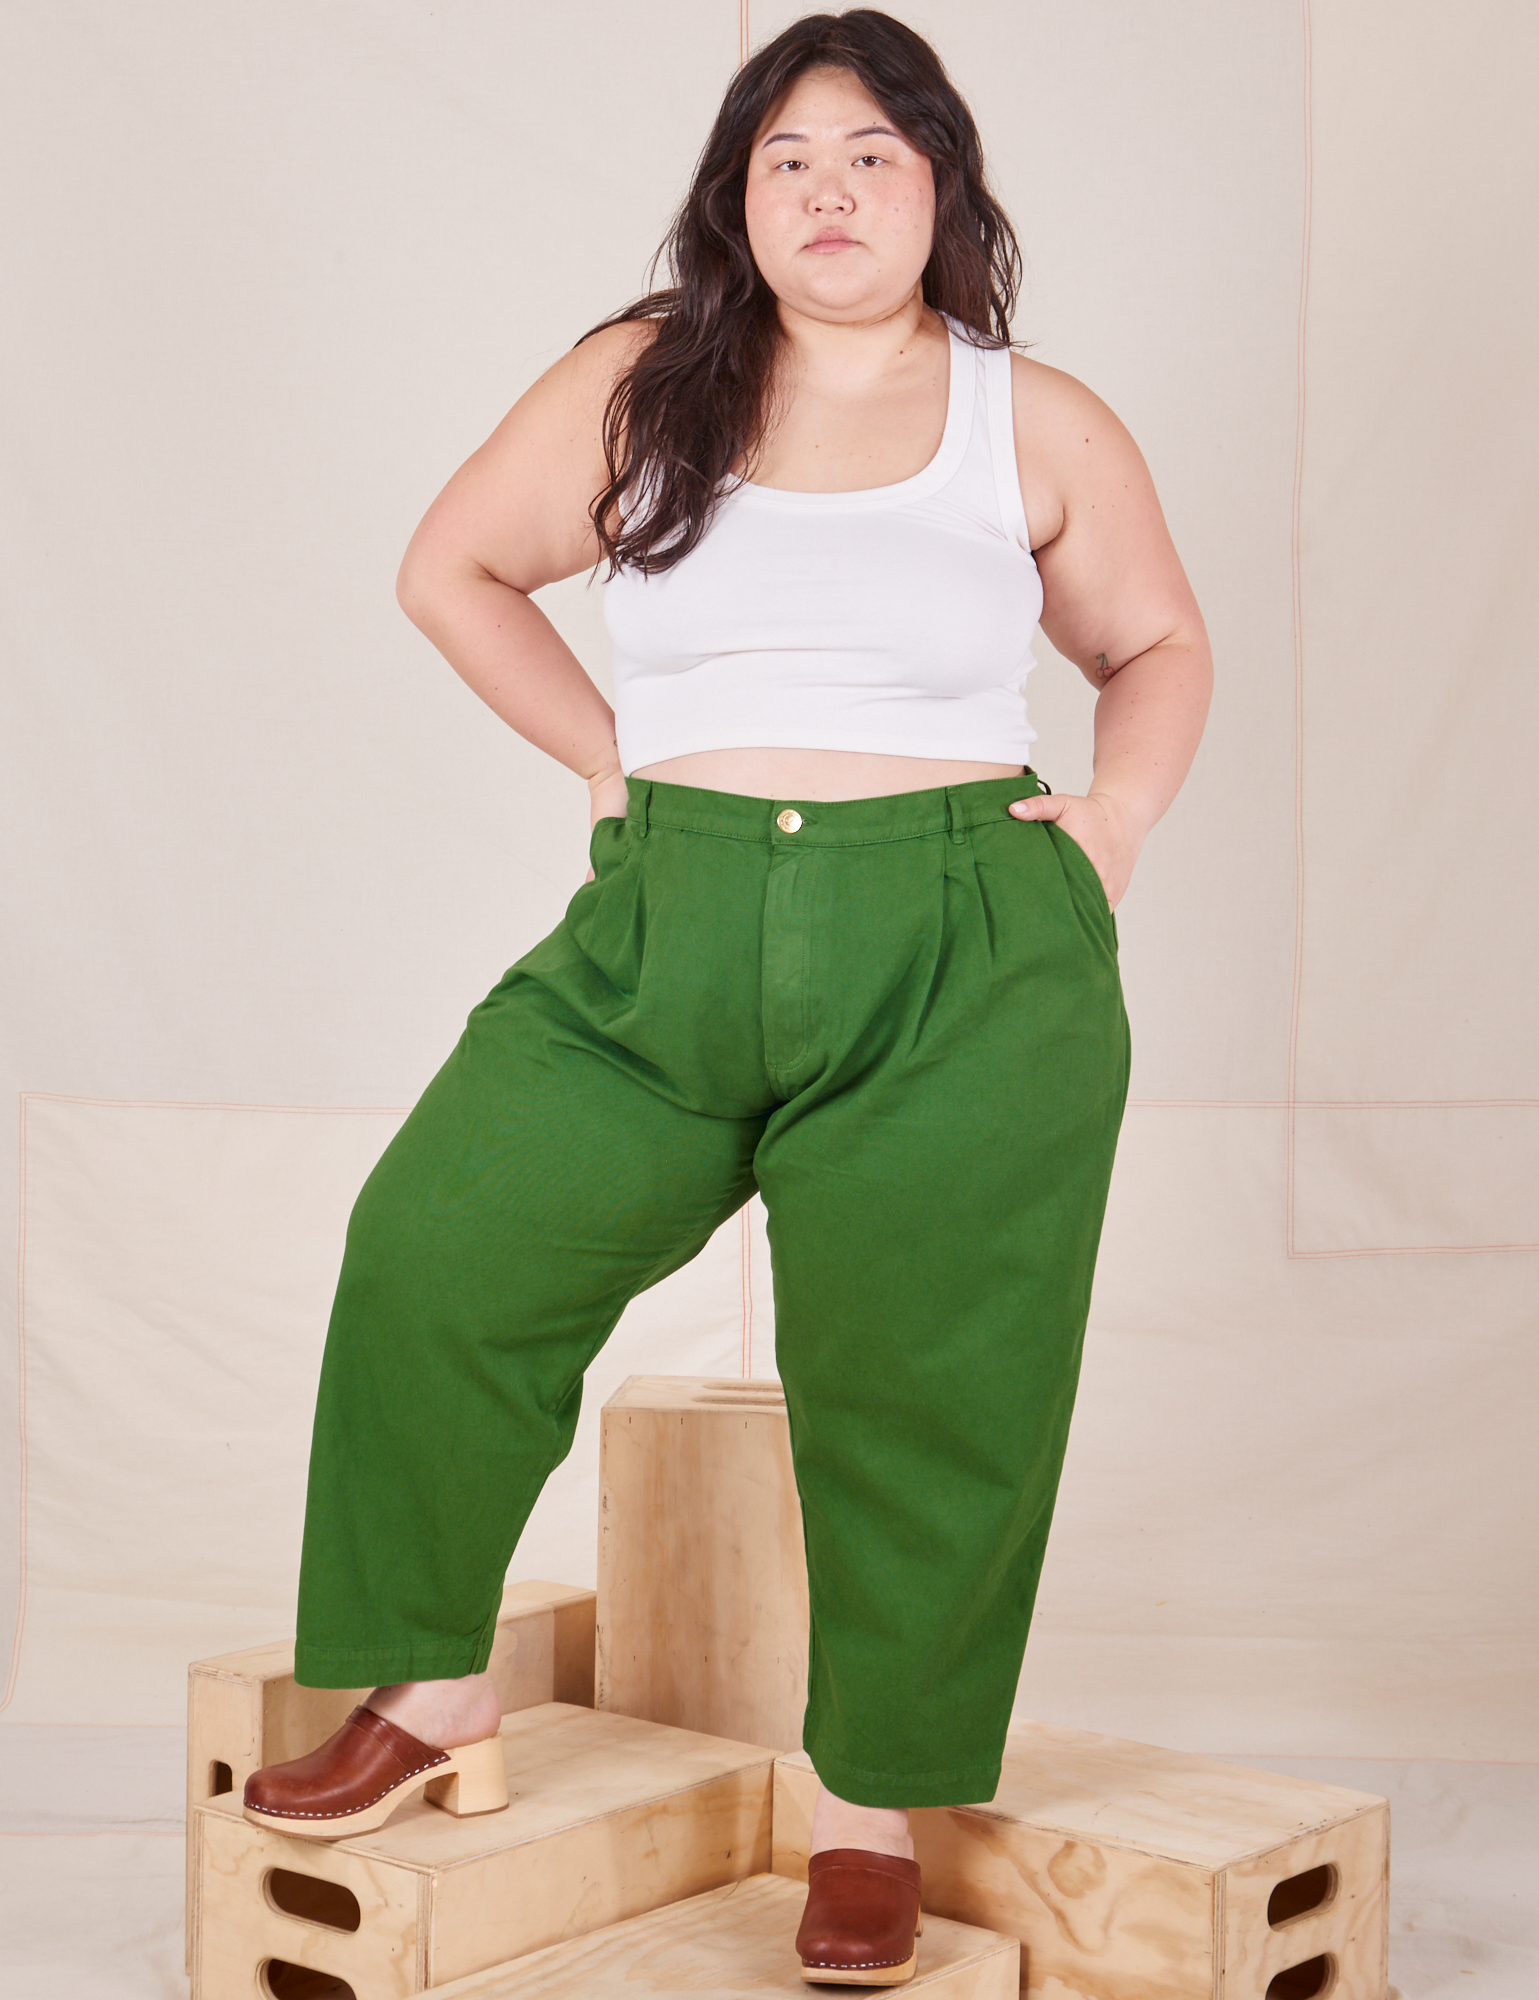 Ashley is 5&#39;7&quot; and wearing 1XL Petite Heavyweight Trousers in Lawn Green paired with vintage off-white Cropped Tank Top